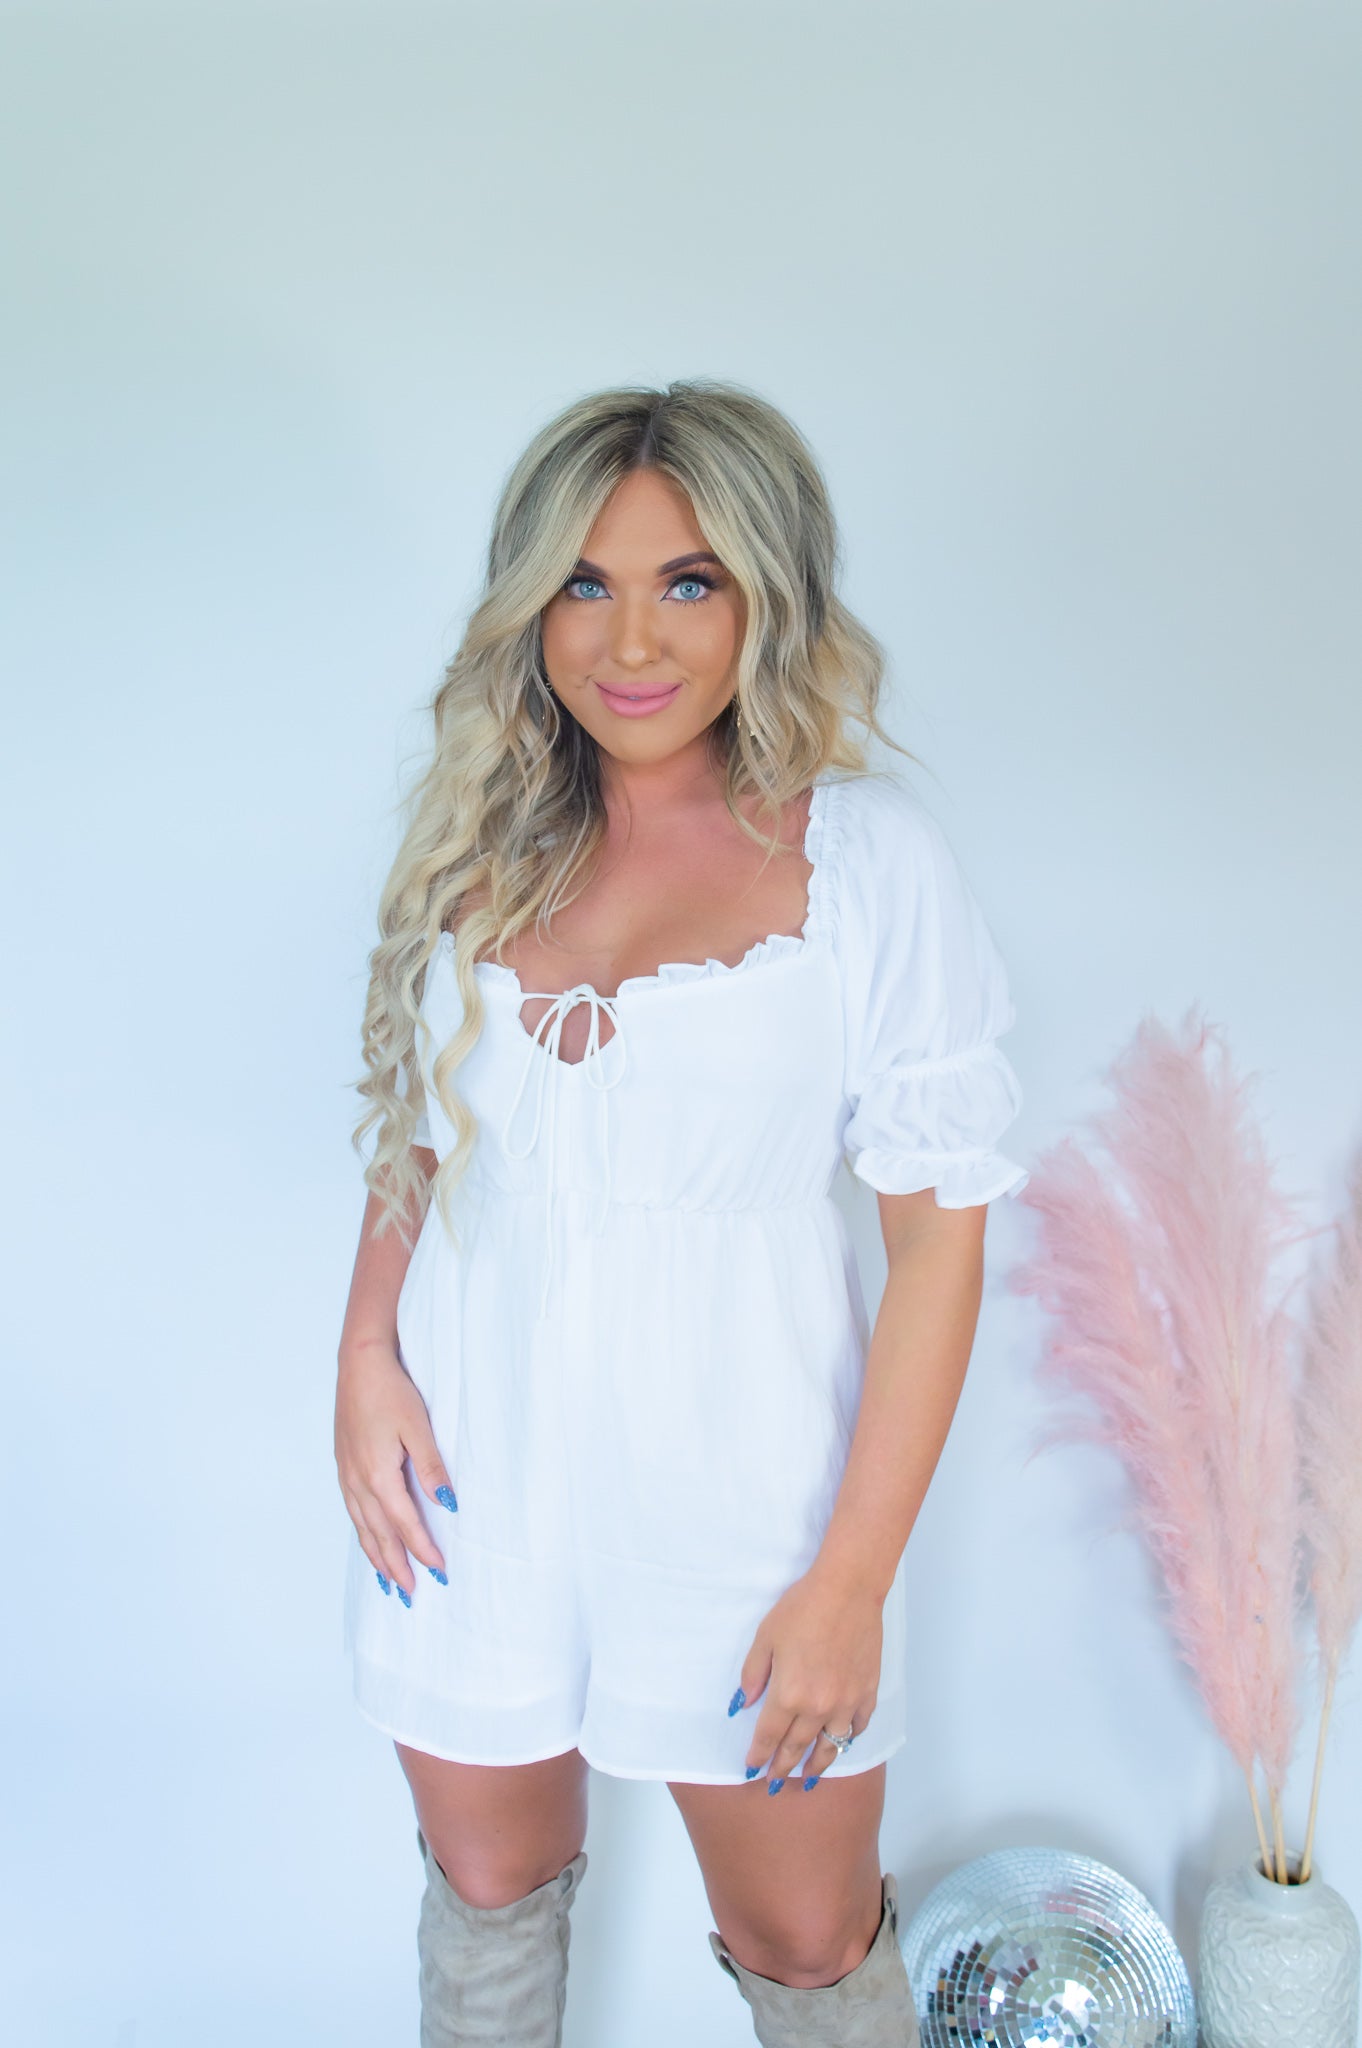 White romper country music outfit white ruffle romper short romper ruffle detailing Nashville outfit summer romper lightweight romper suede boots country music concert outfit